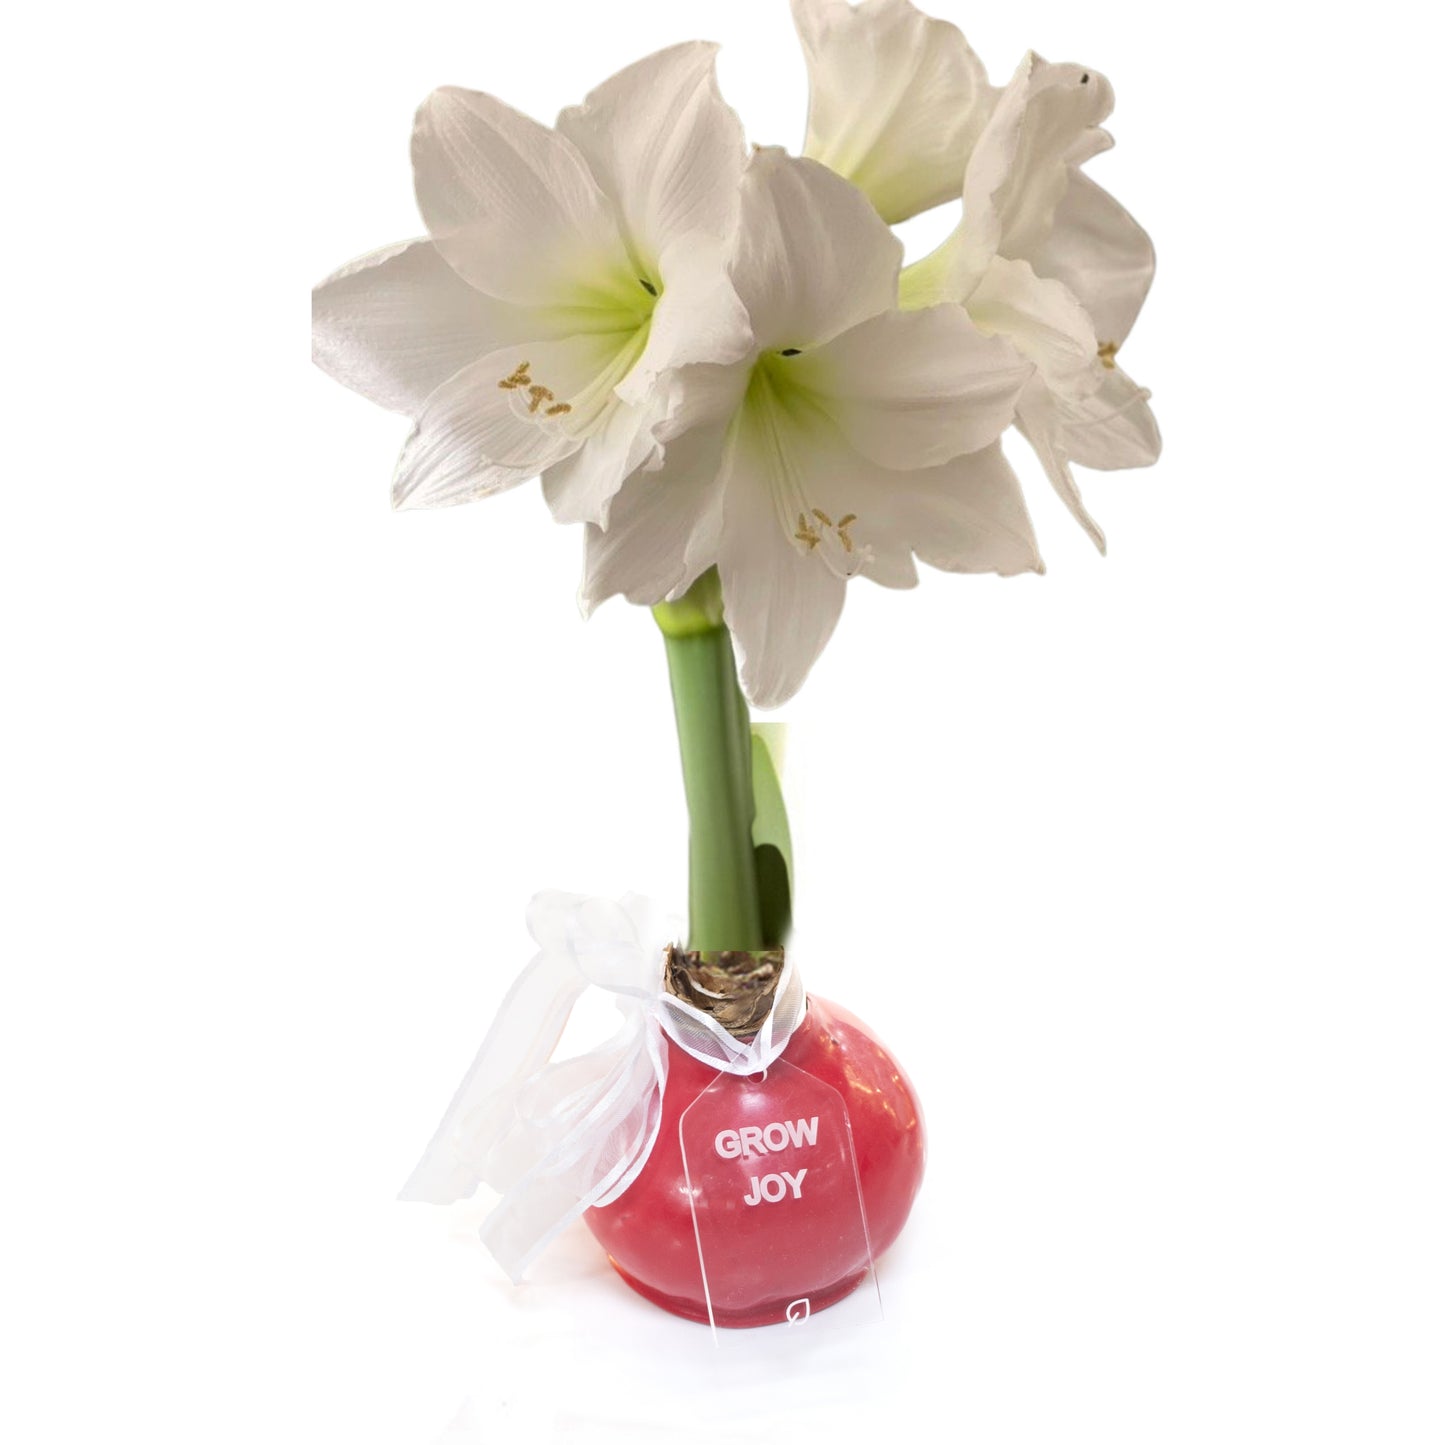 Red Waxed Amaryllis Bulb, Red Bloom Sold Out